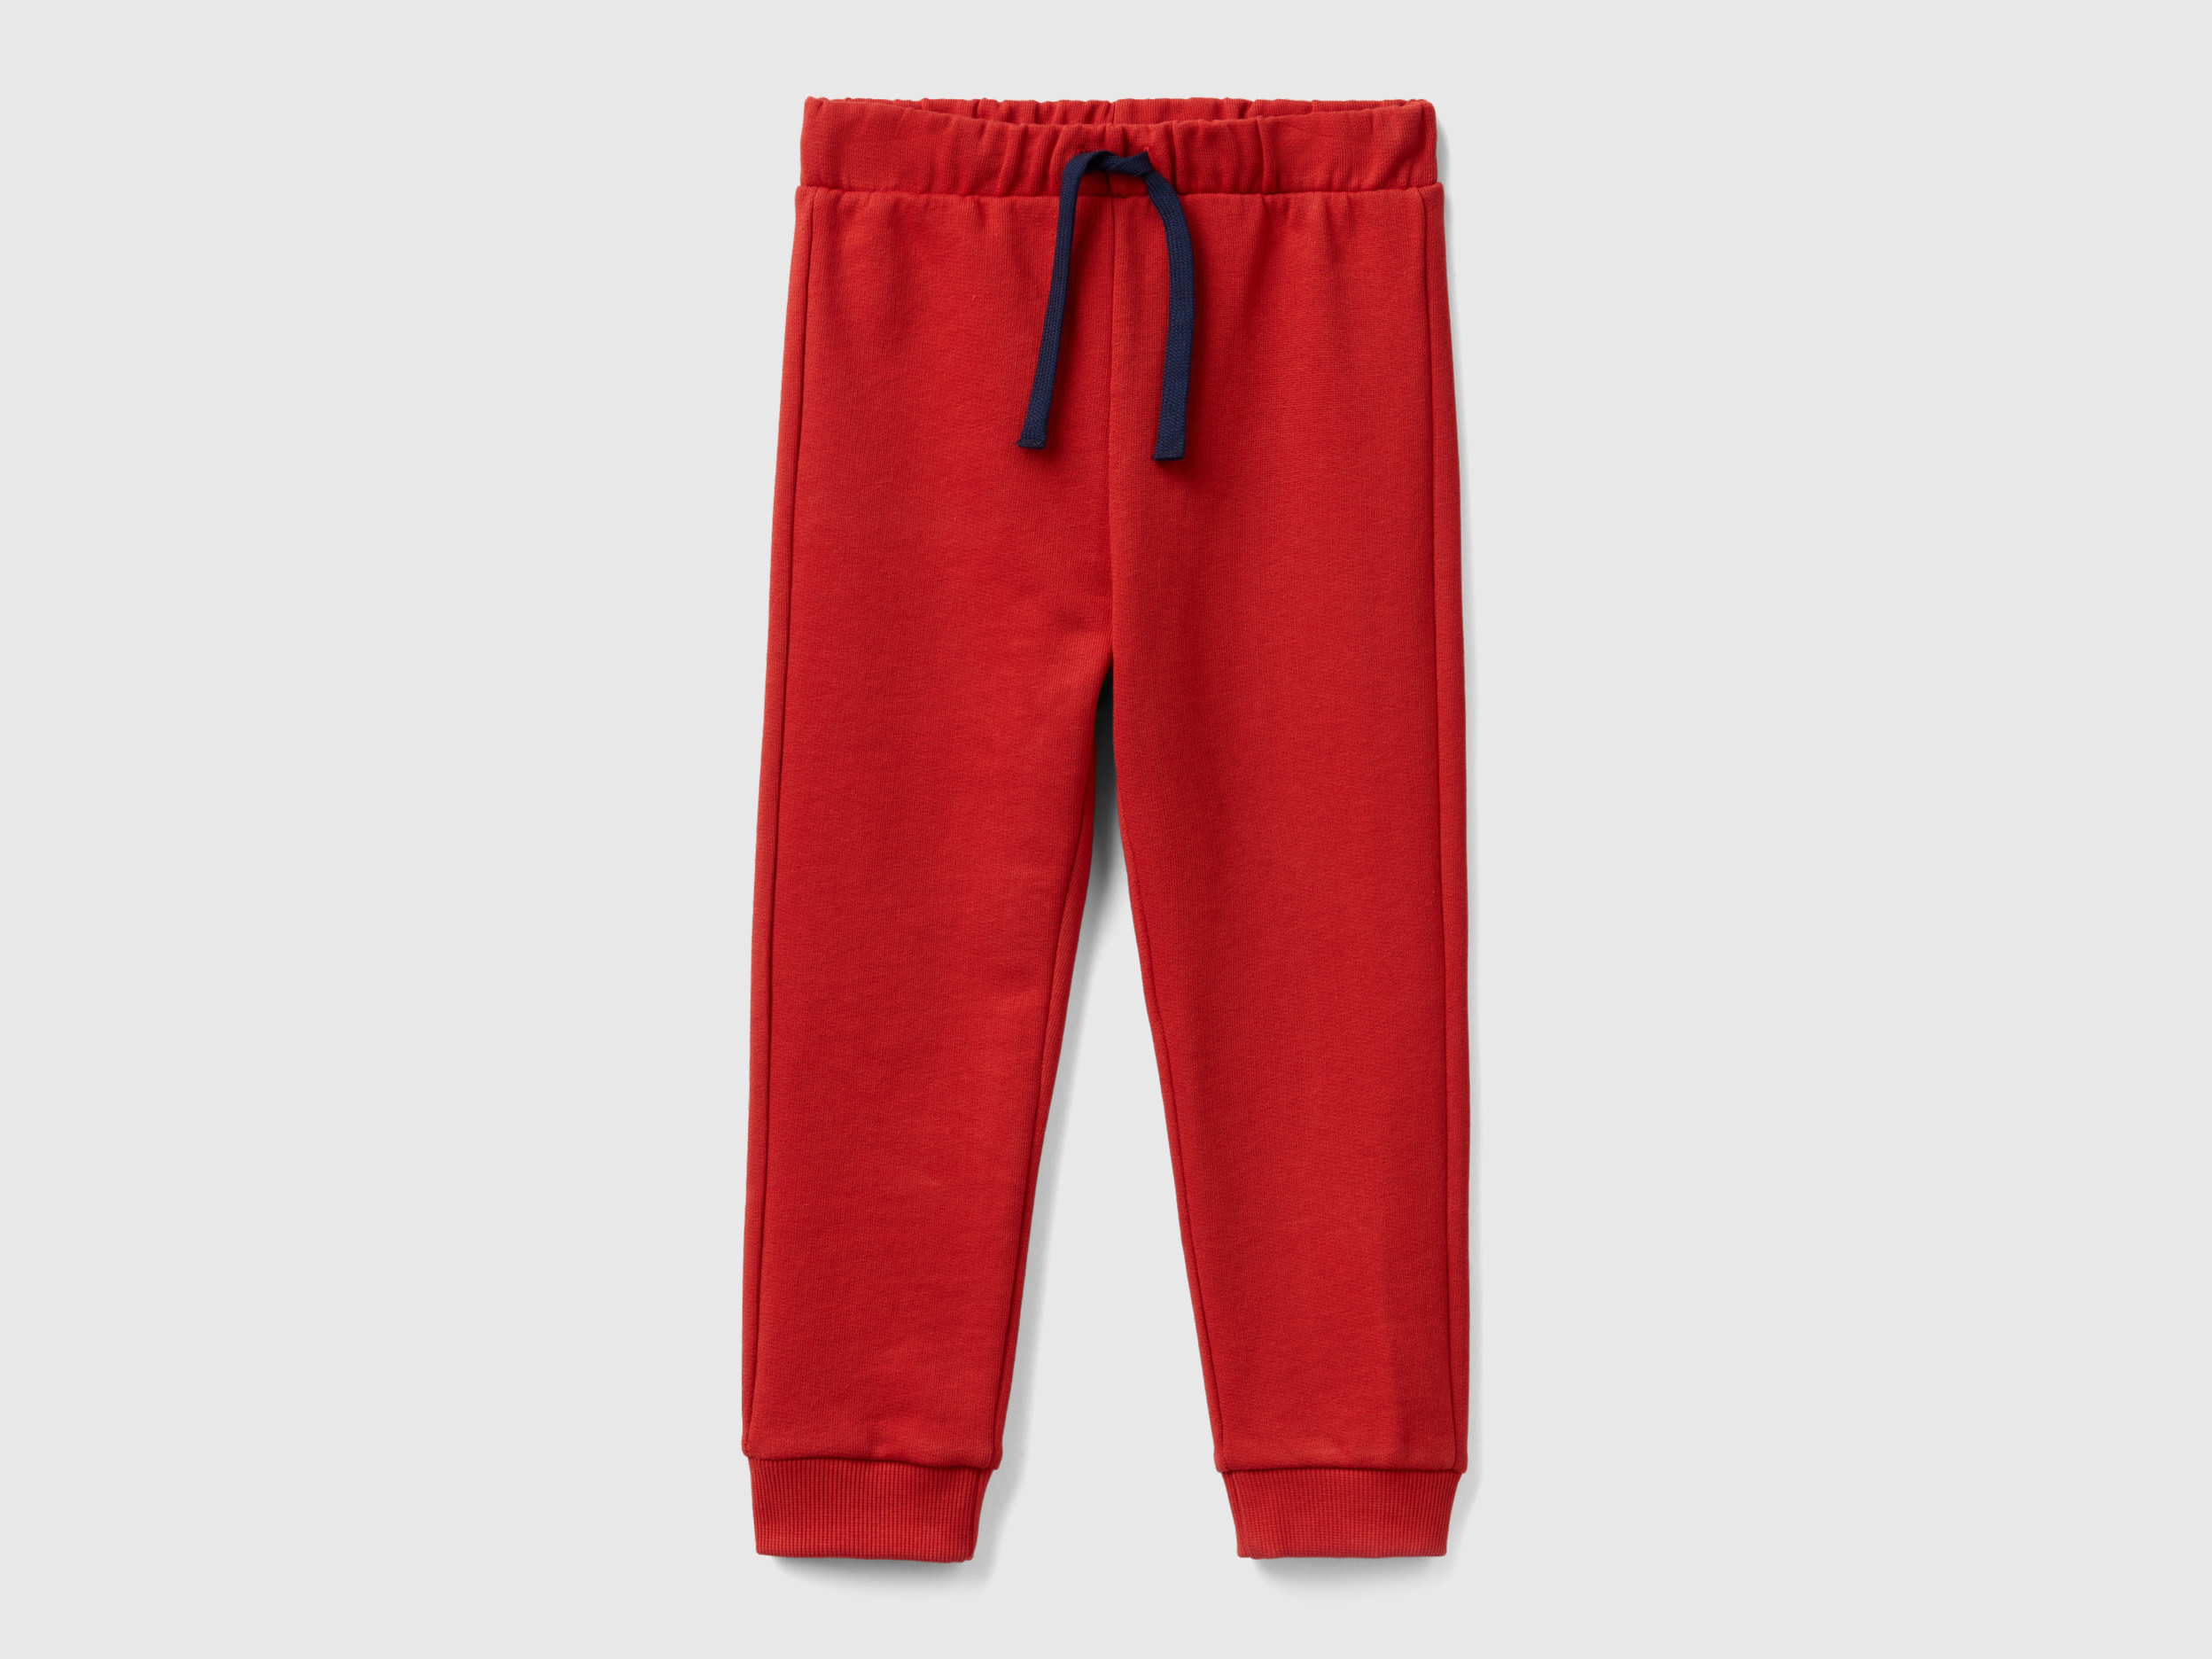 Image of Benetton, Sweatpants With Pocket, size 98, Brick Red, Kids